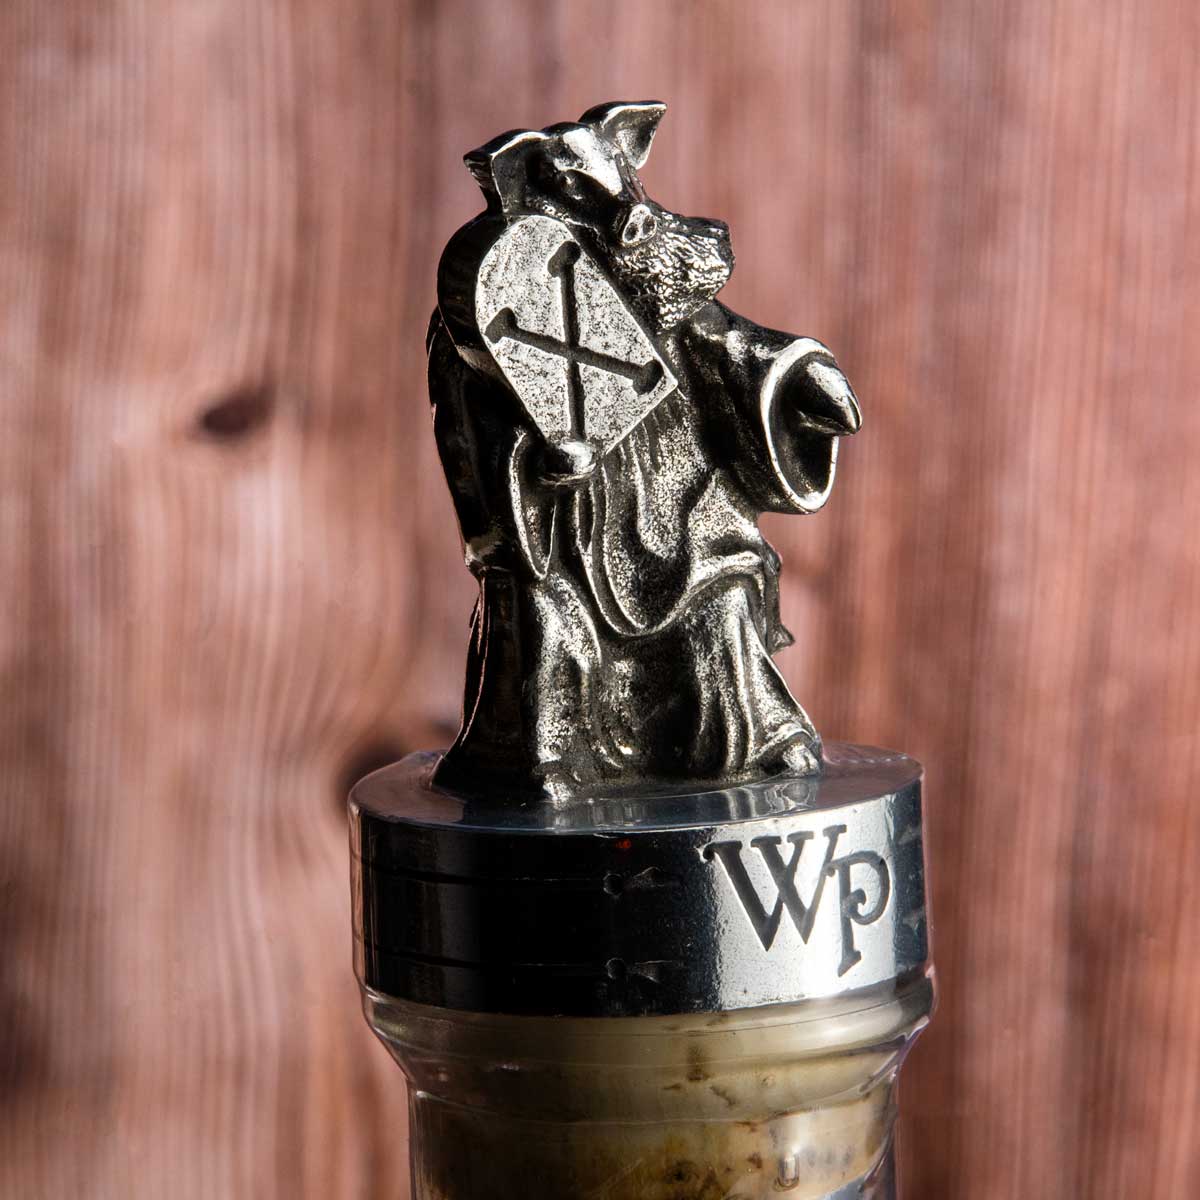 WhistlePig The Boss Hog X "The Commandments" pewter stopper and cork